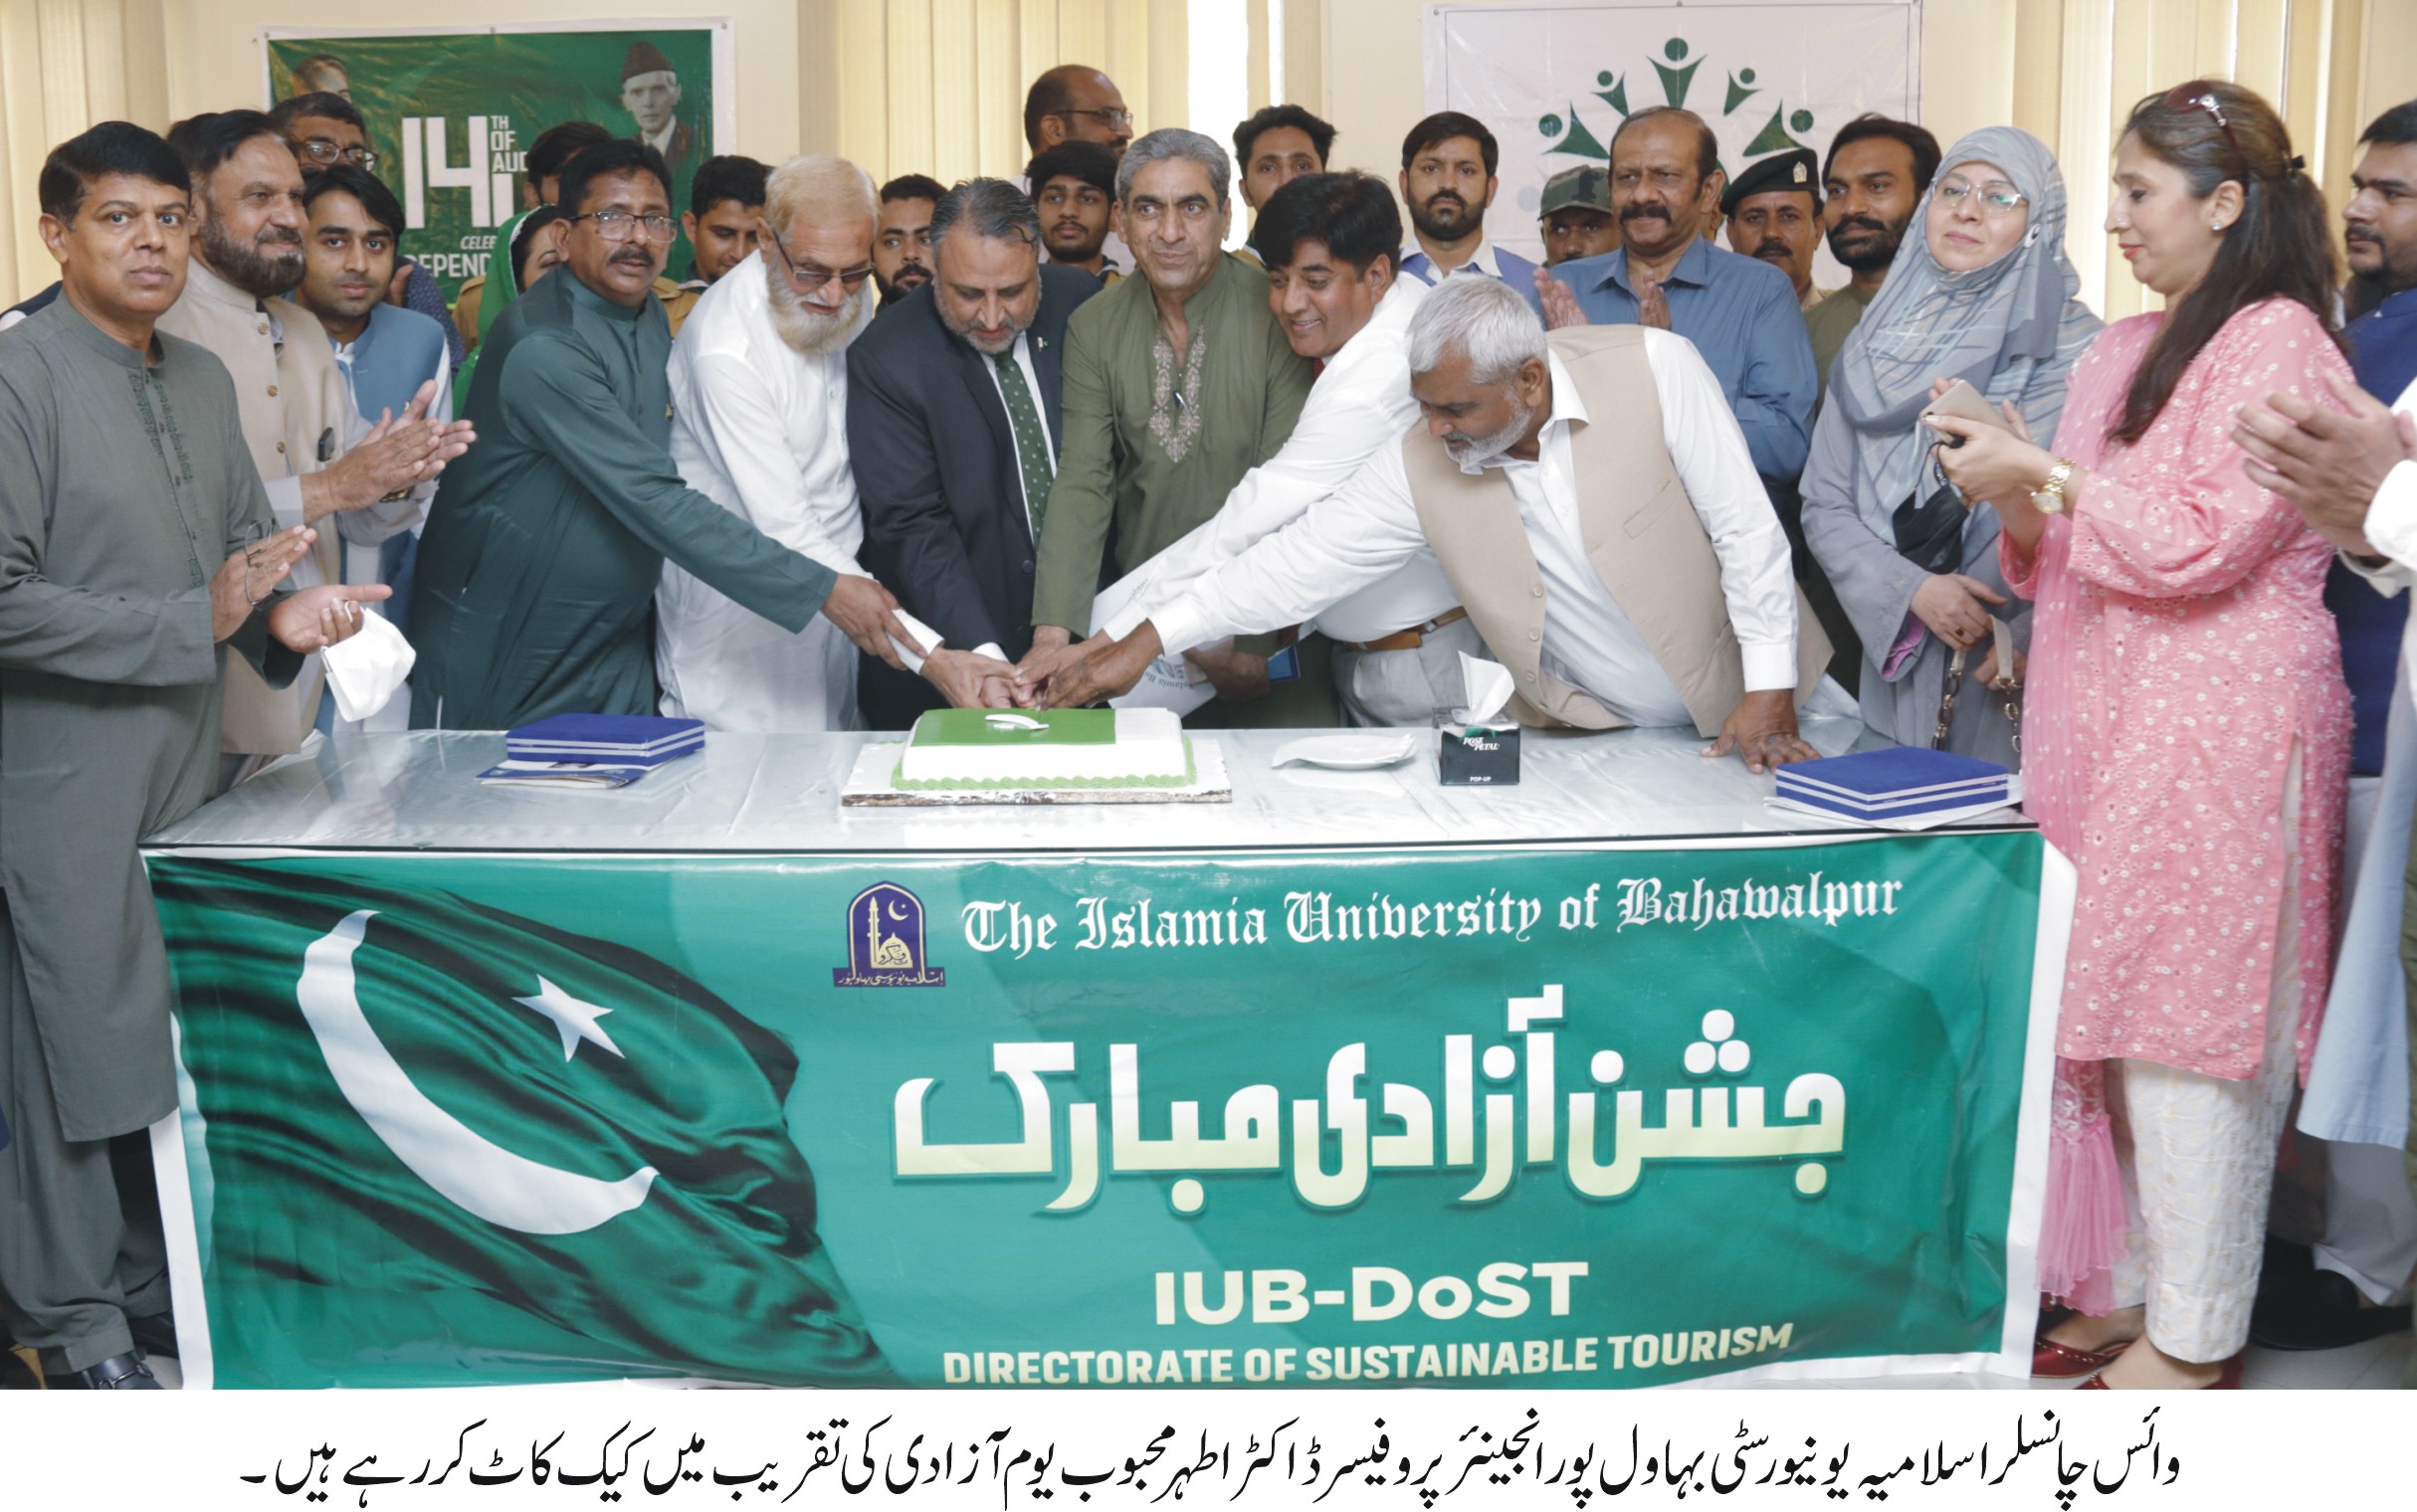 cake cutting ceremony on independence day